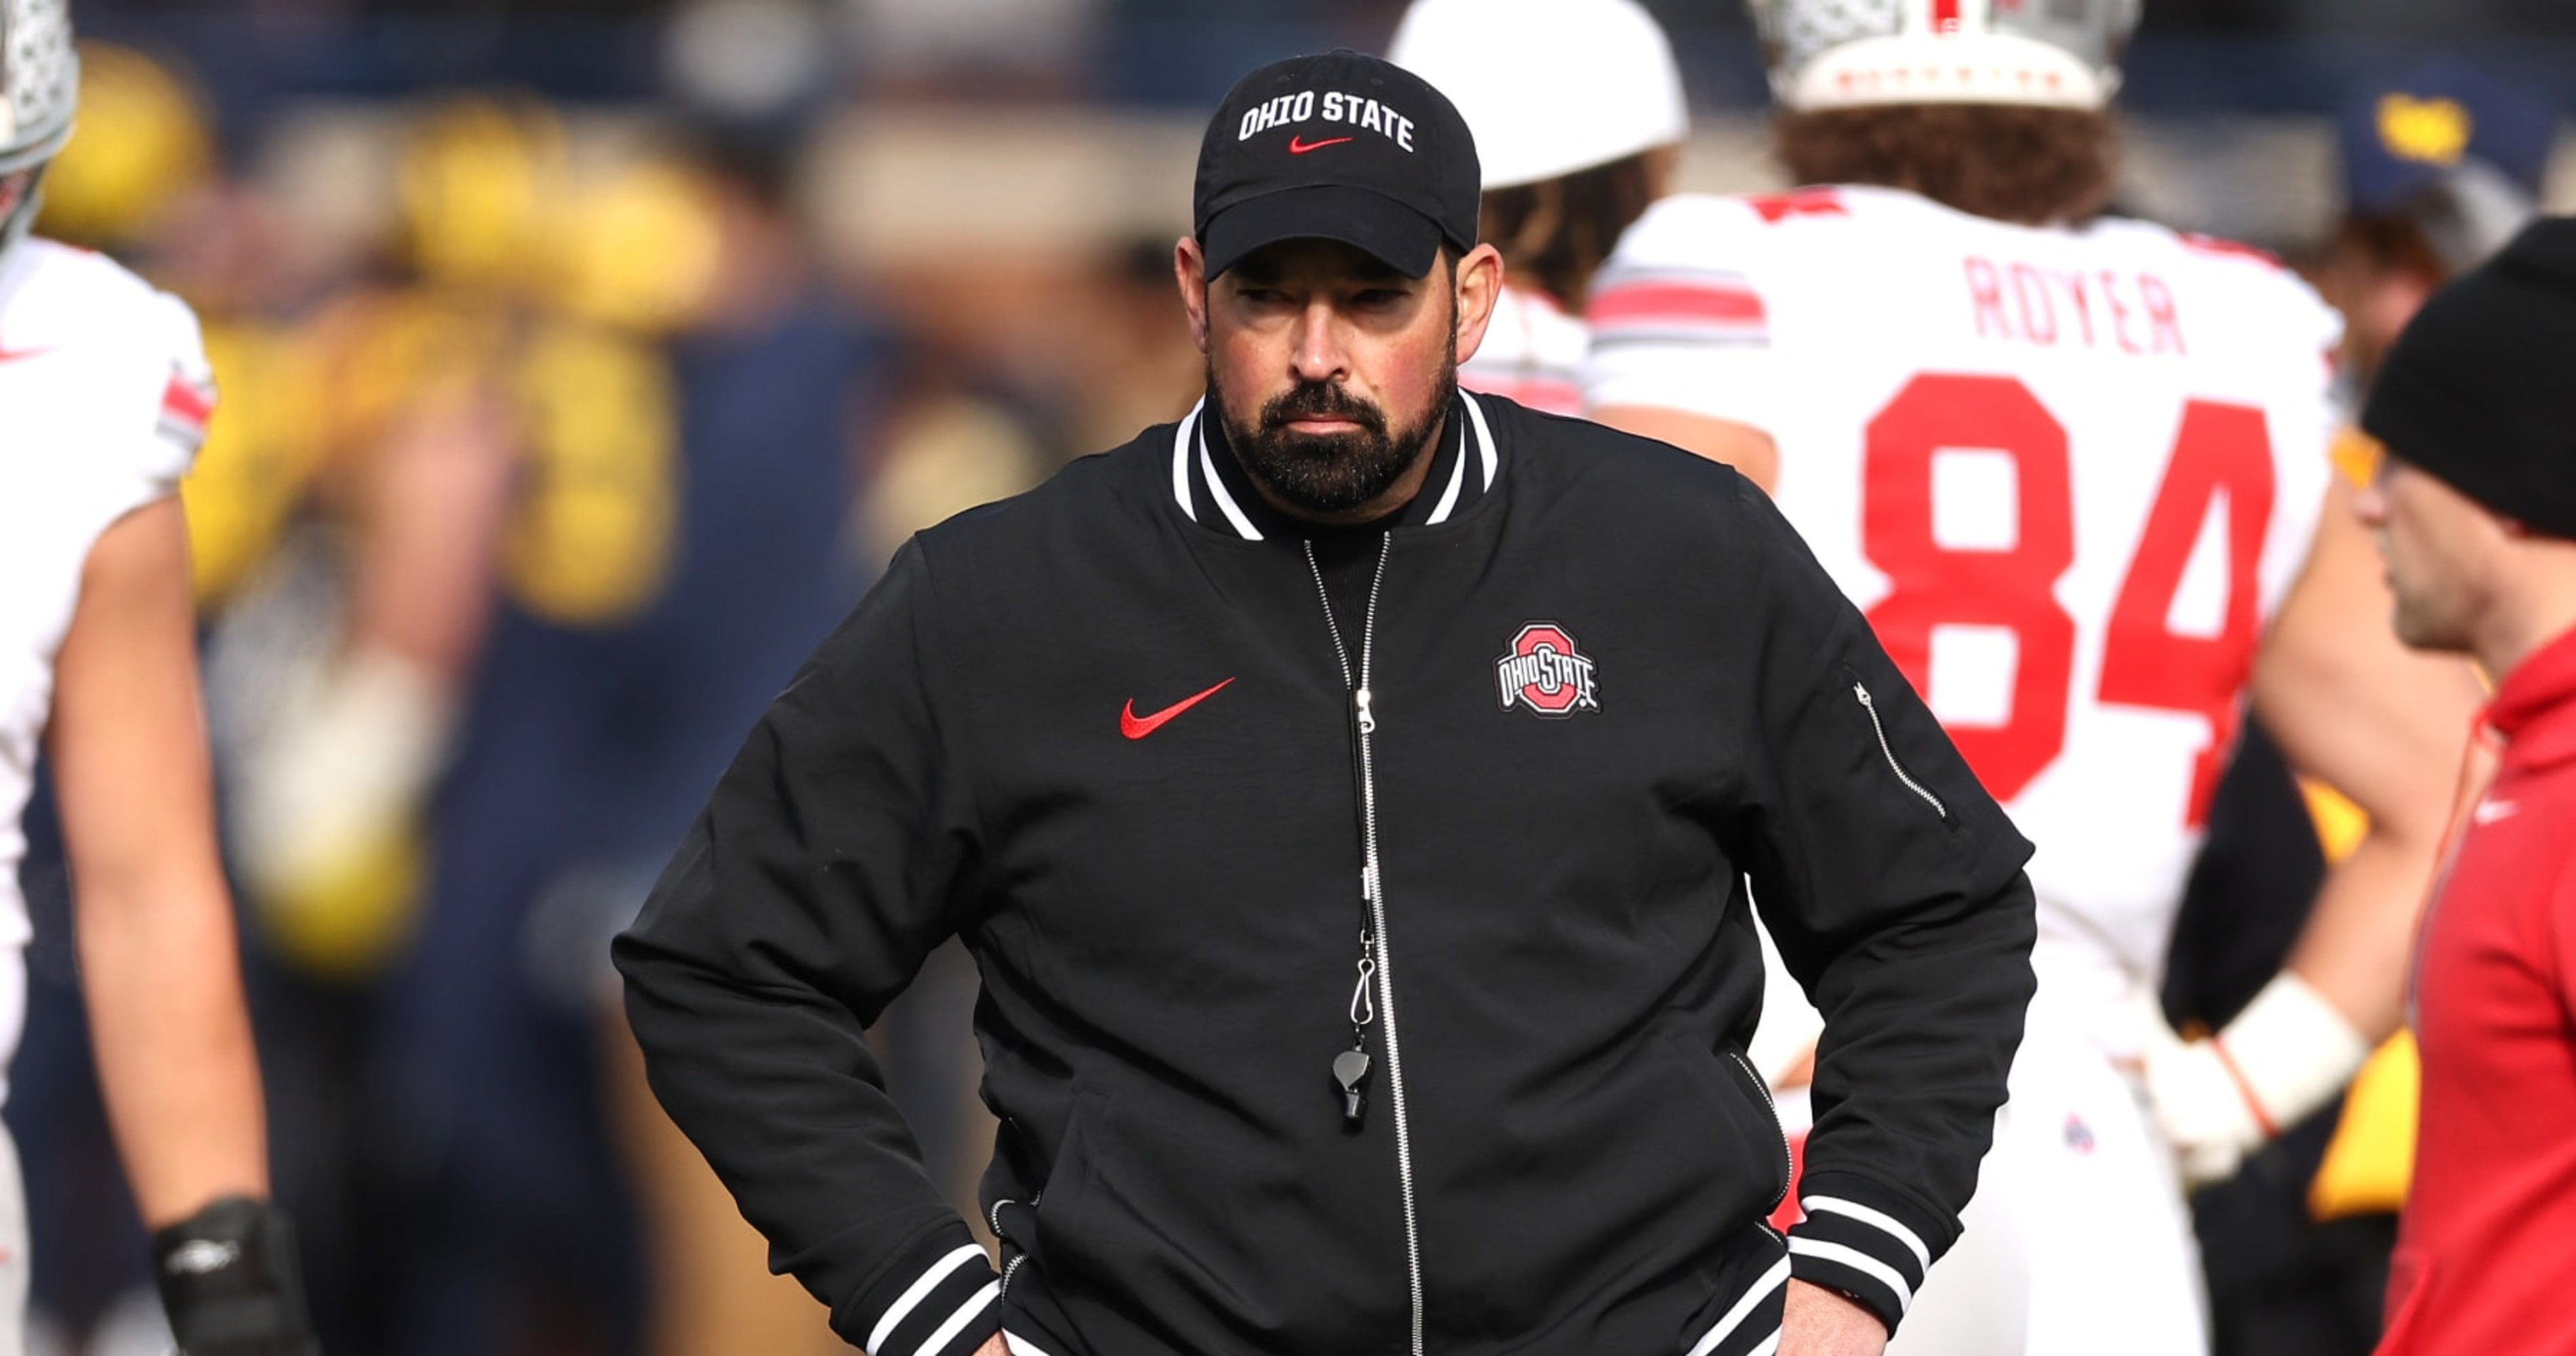 Report: Ohio State Football Self-Reported 4 Level 3 NCAA Recruiting Violations